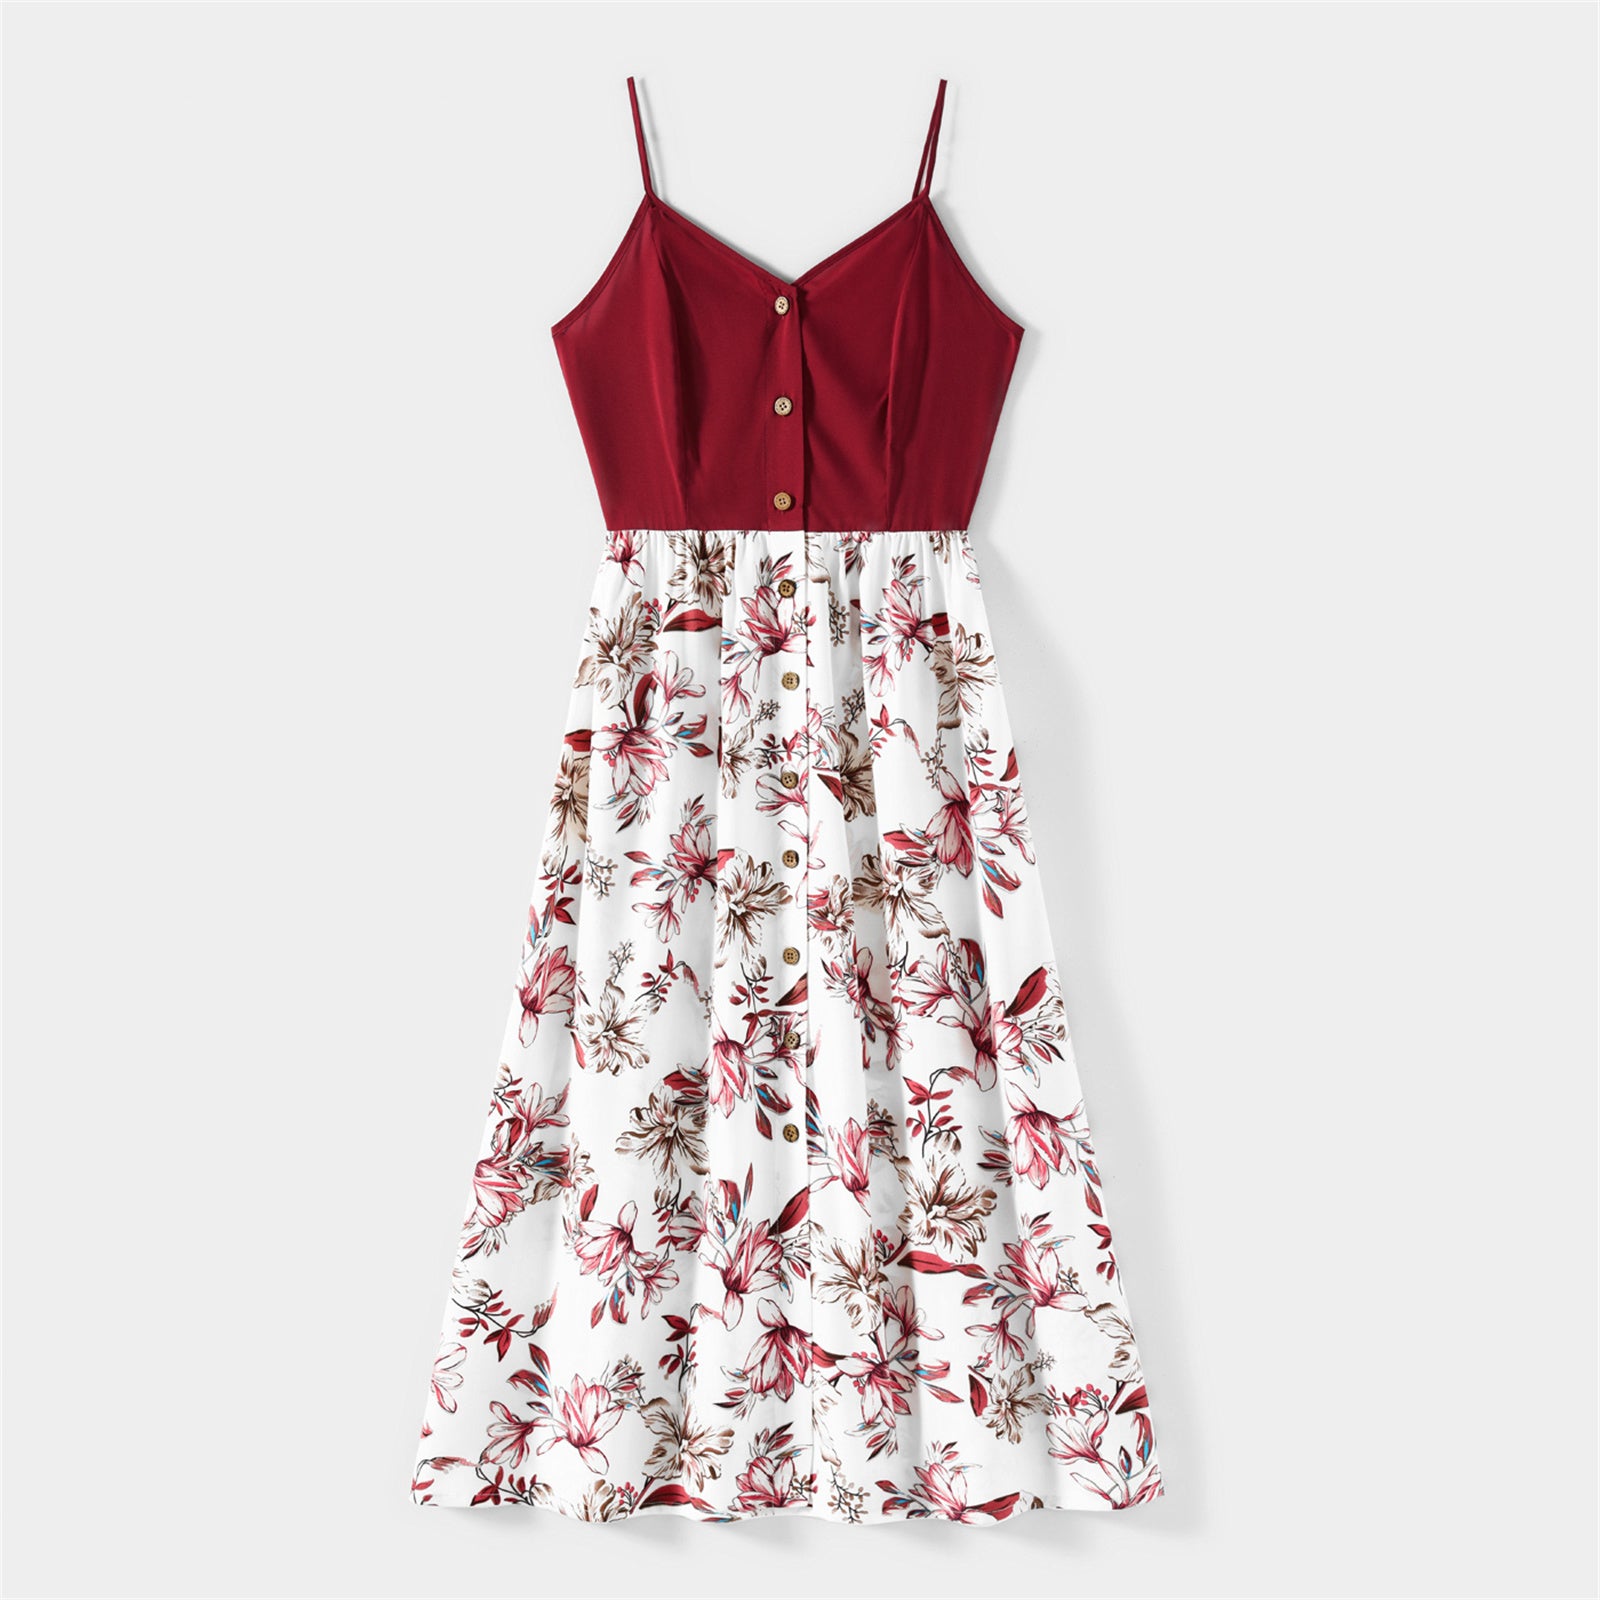 Family Matching All Over Floral Print Cross Wrap V Neck Spaghetti Strap Dresses and Splicing Short-sleeve T-shirts Sets